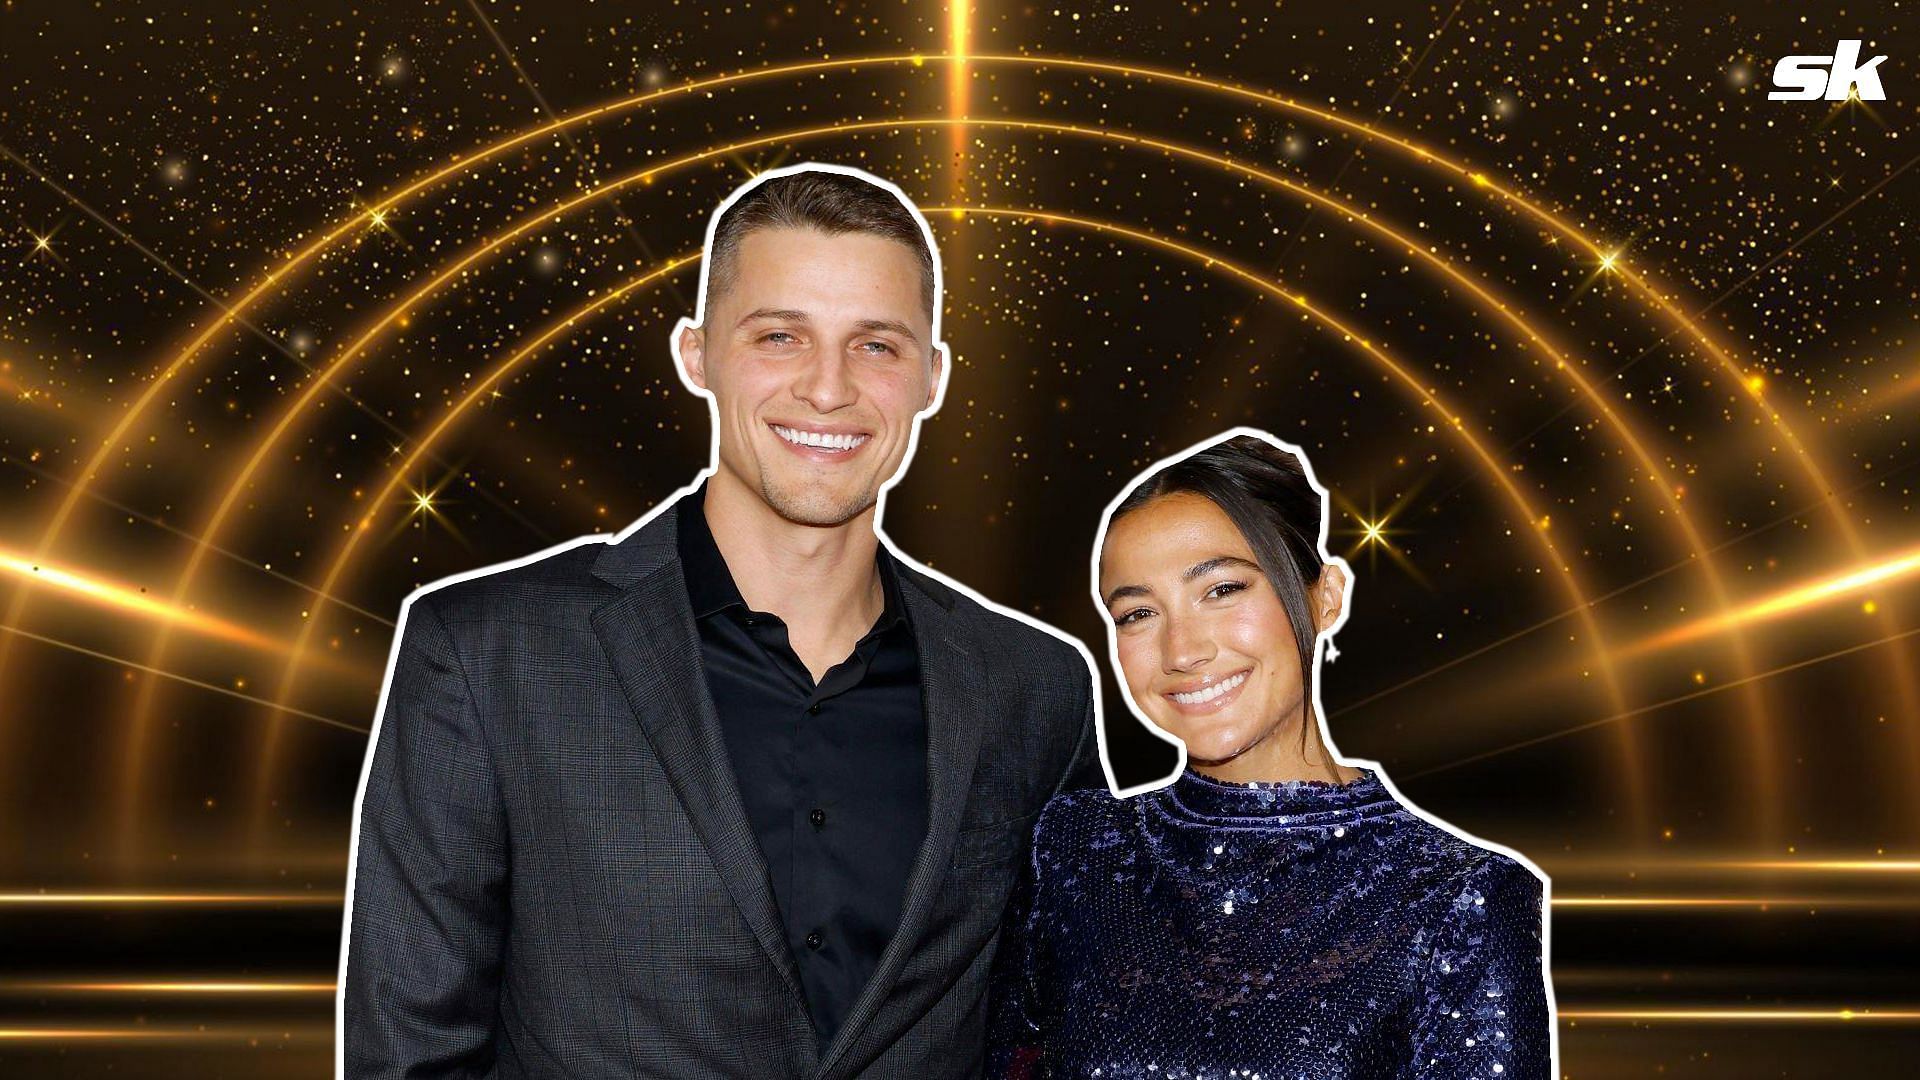 Mady Seager spotted alongside hubby Cody Seager at the CMA Awards